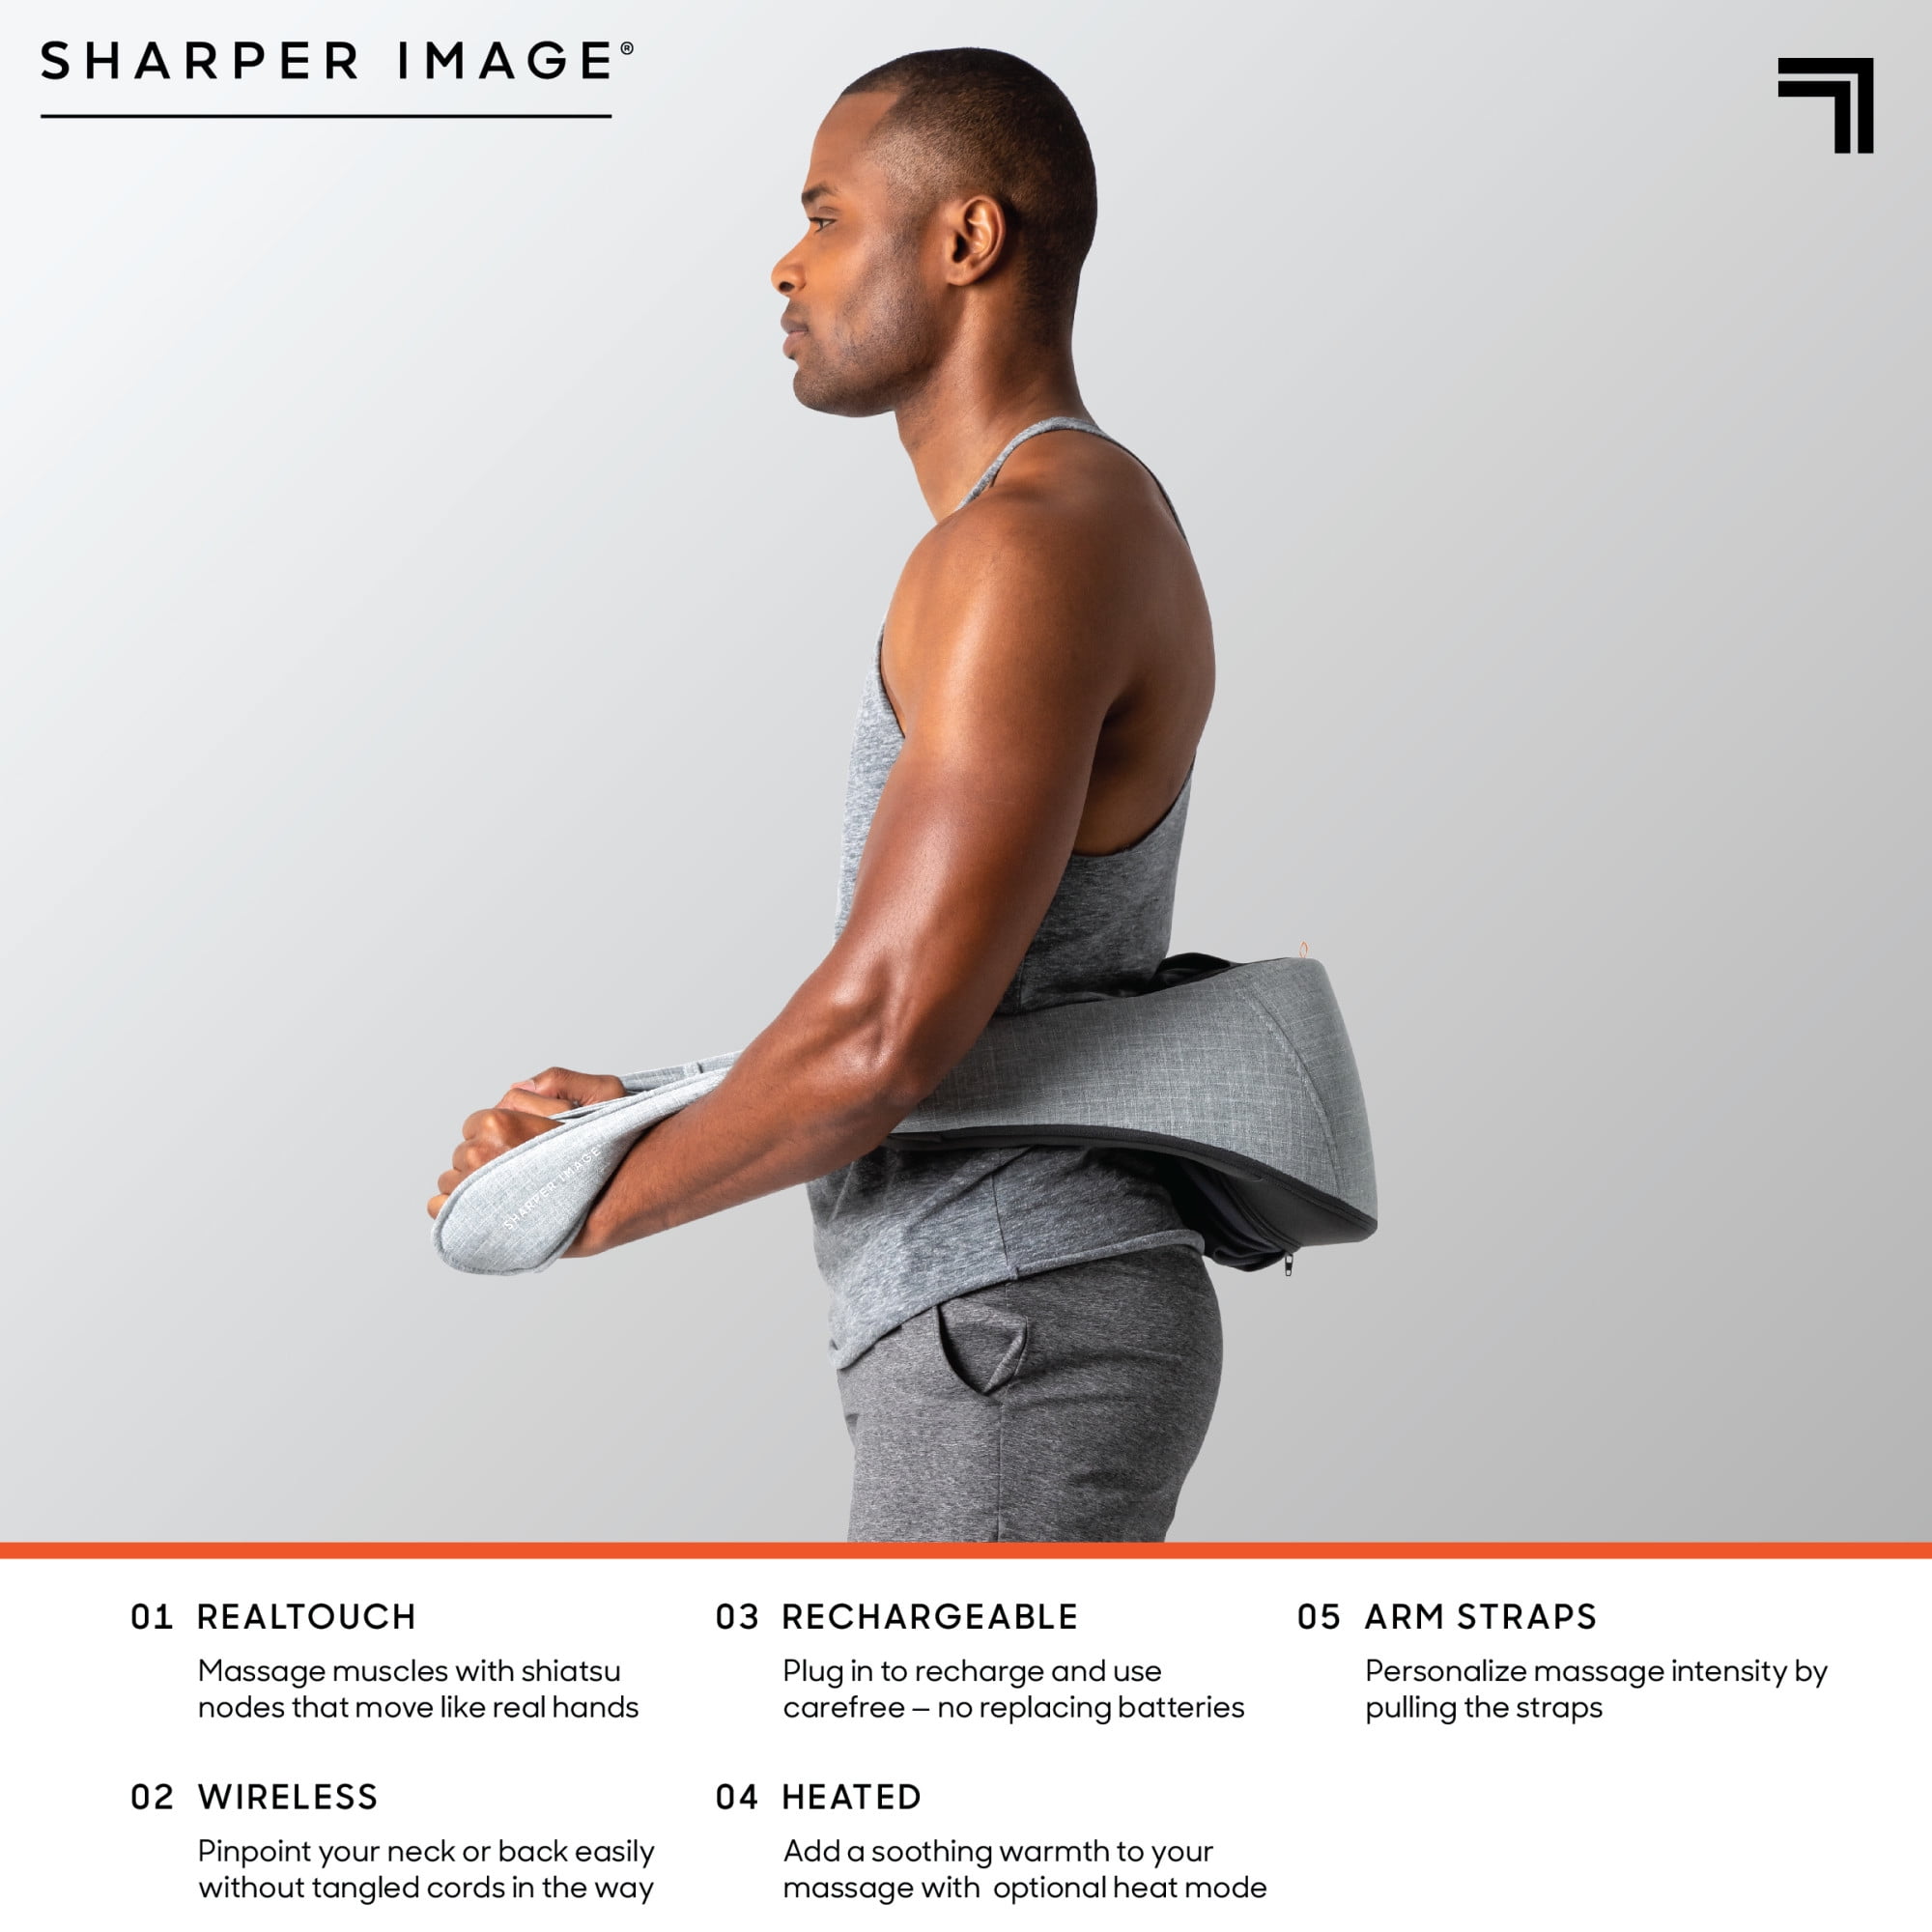 Sharper Image Realtouch Shiatsu Massager, Warming Heat Soothes Sore  Muscles, Wireless & Rechargeable…See more Sharper Image Realtouch Shiatsu